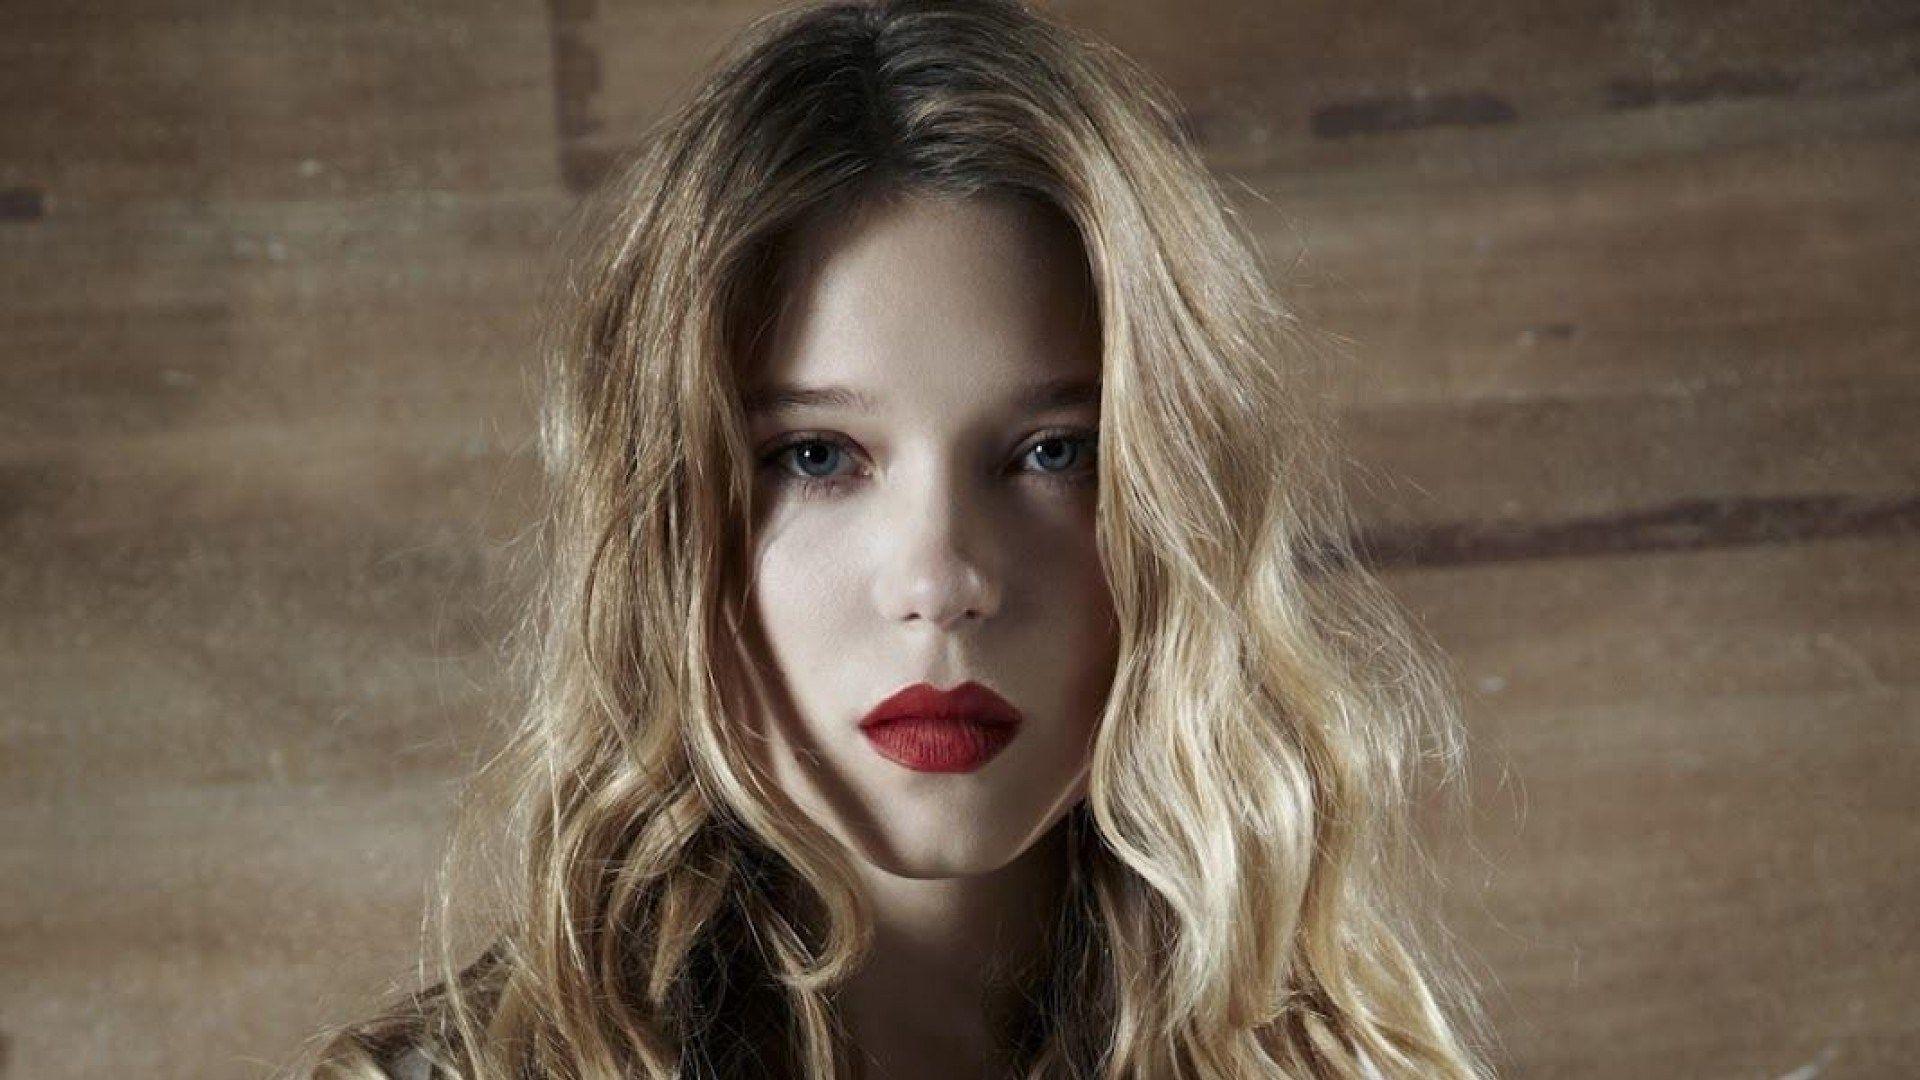 Lea Seydoux Wallpaper High Resolution and Quality Download